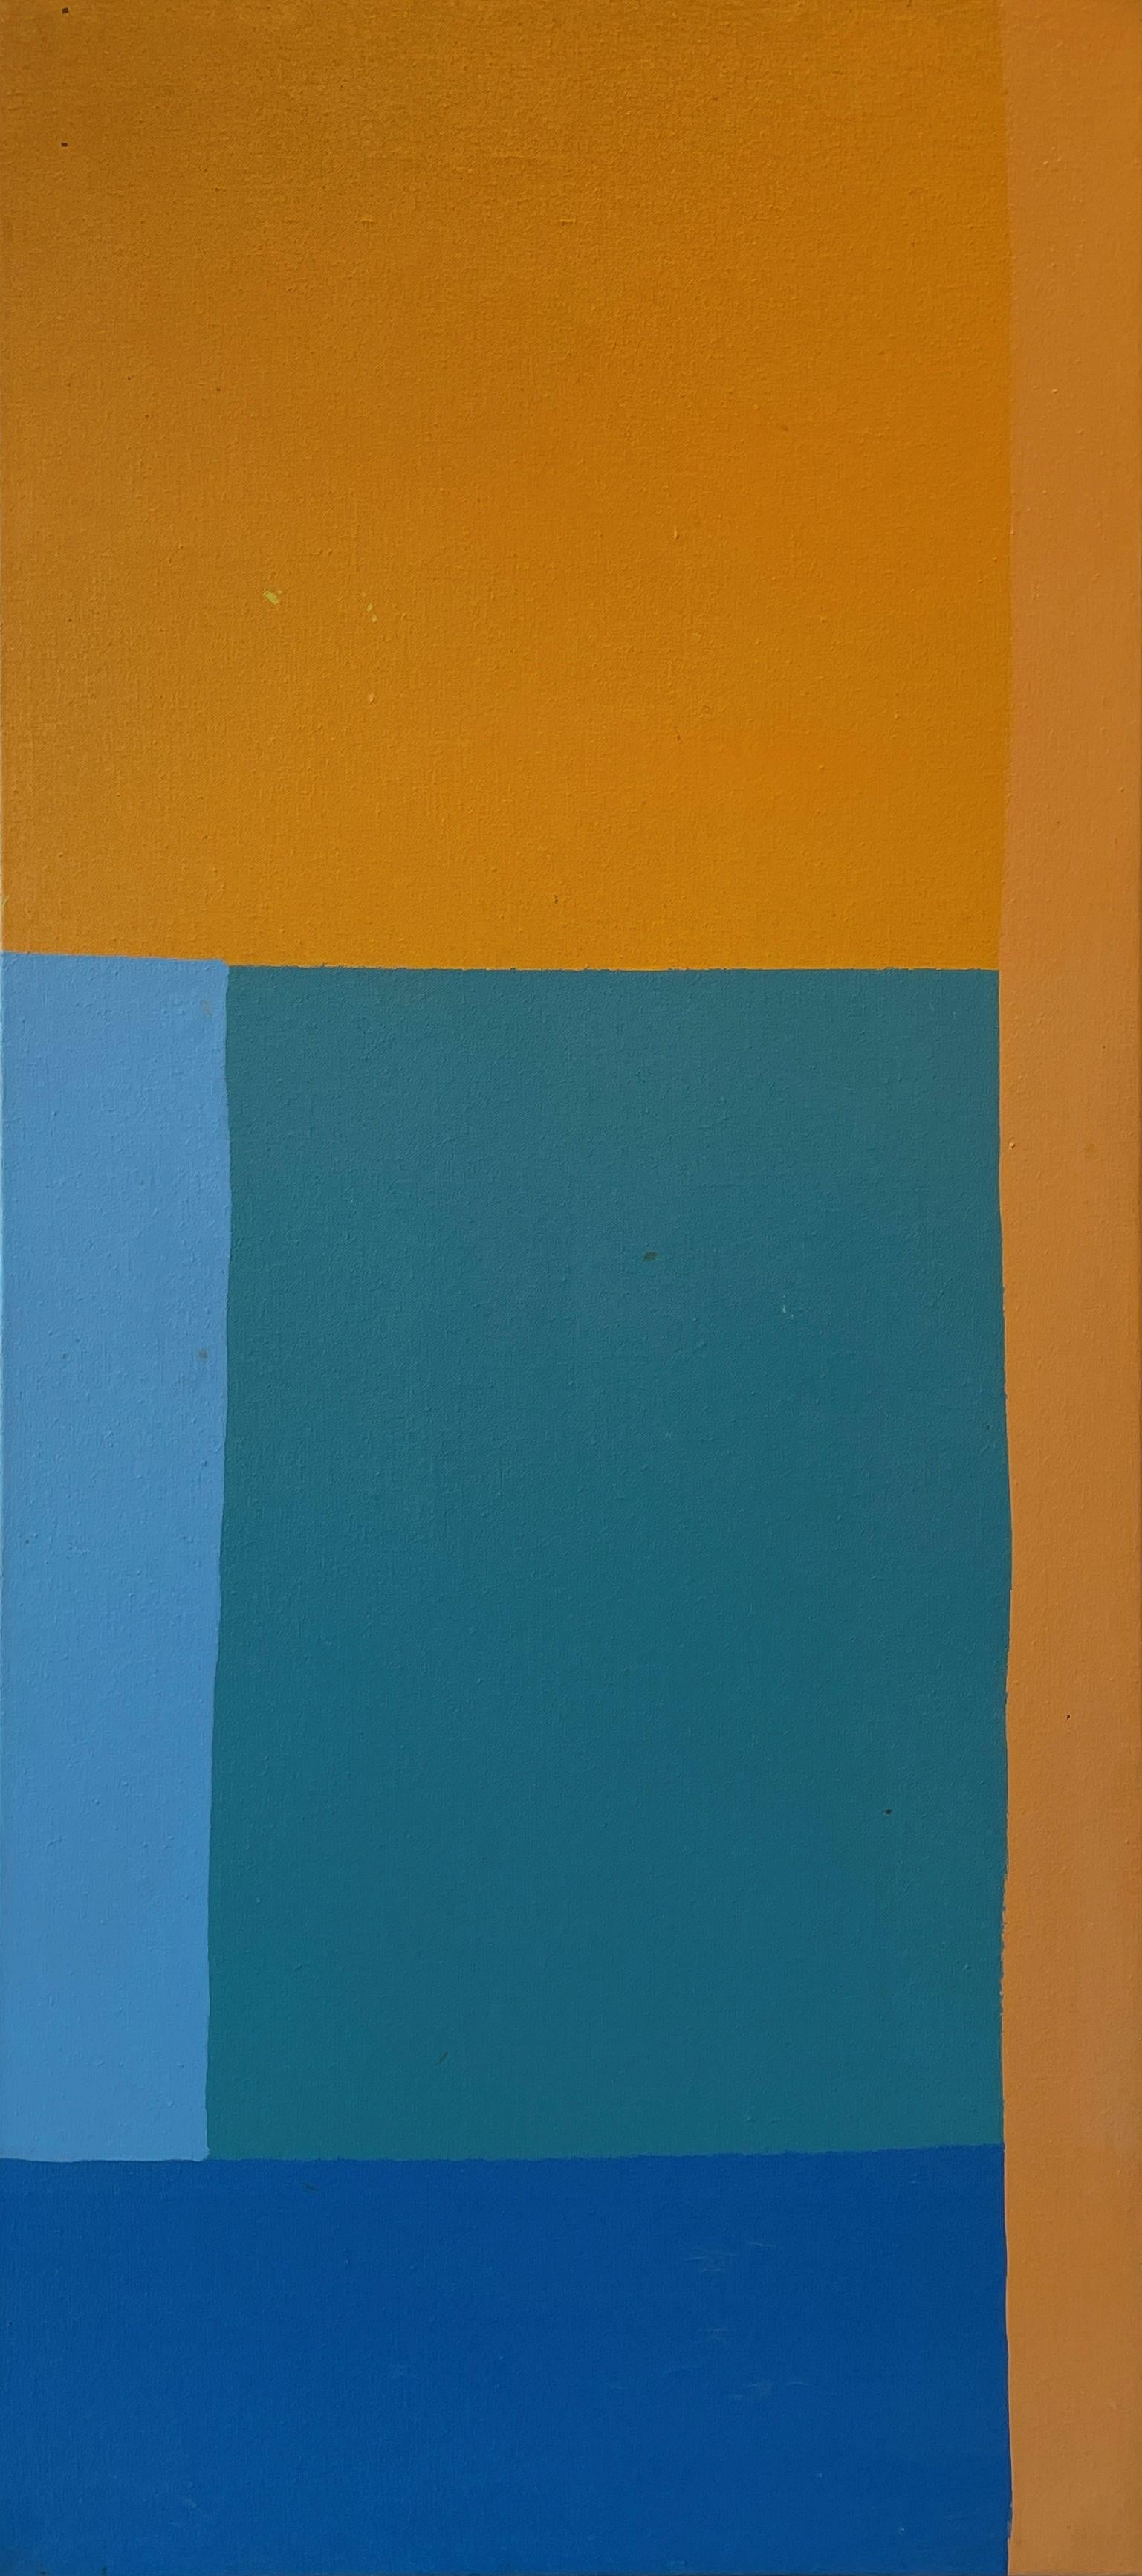 Dan Christensen
Untitled, circa 1970-71
Acrylic and enamel on canvas
44 x 20 inches

Provenance:
The artist
Sherron Francis (gift from the above)

Dan Christensen was an American abstract artist. An art critic, Clement Greenberg, described Dan